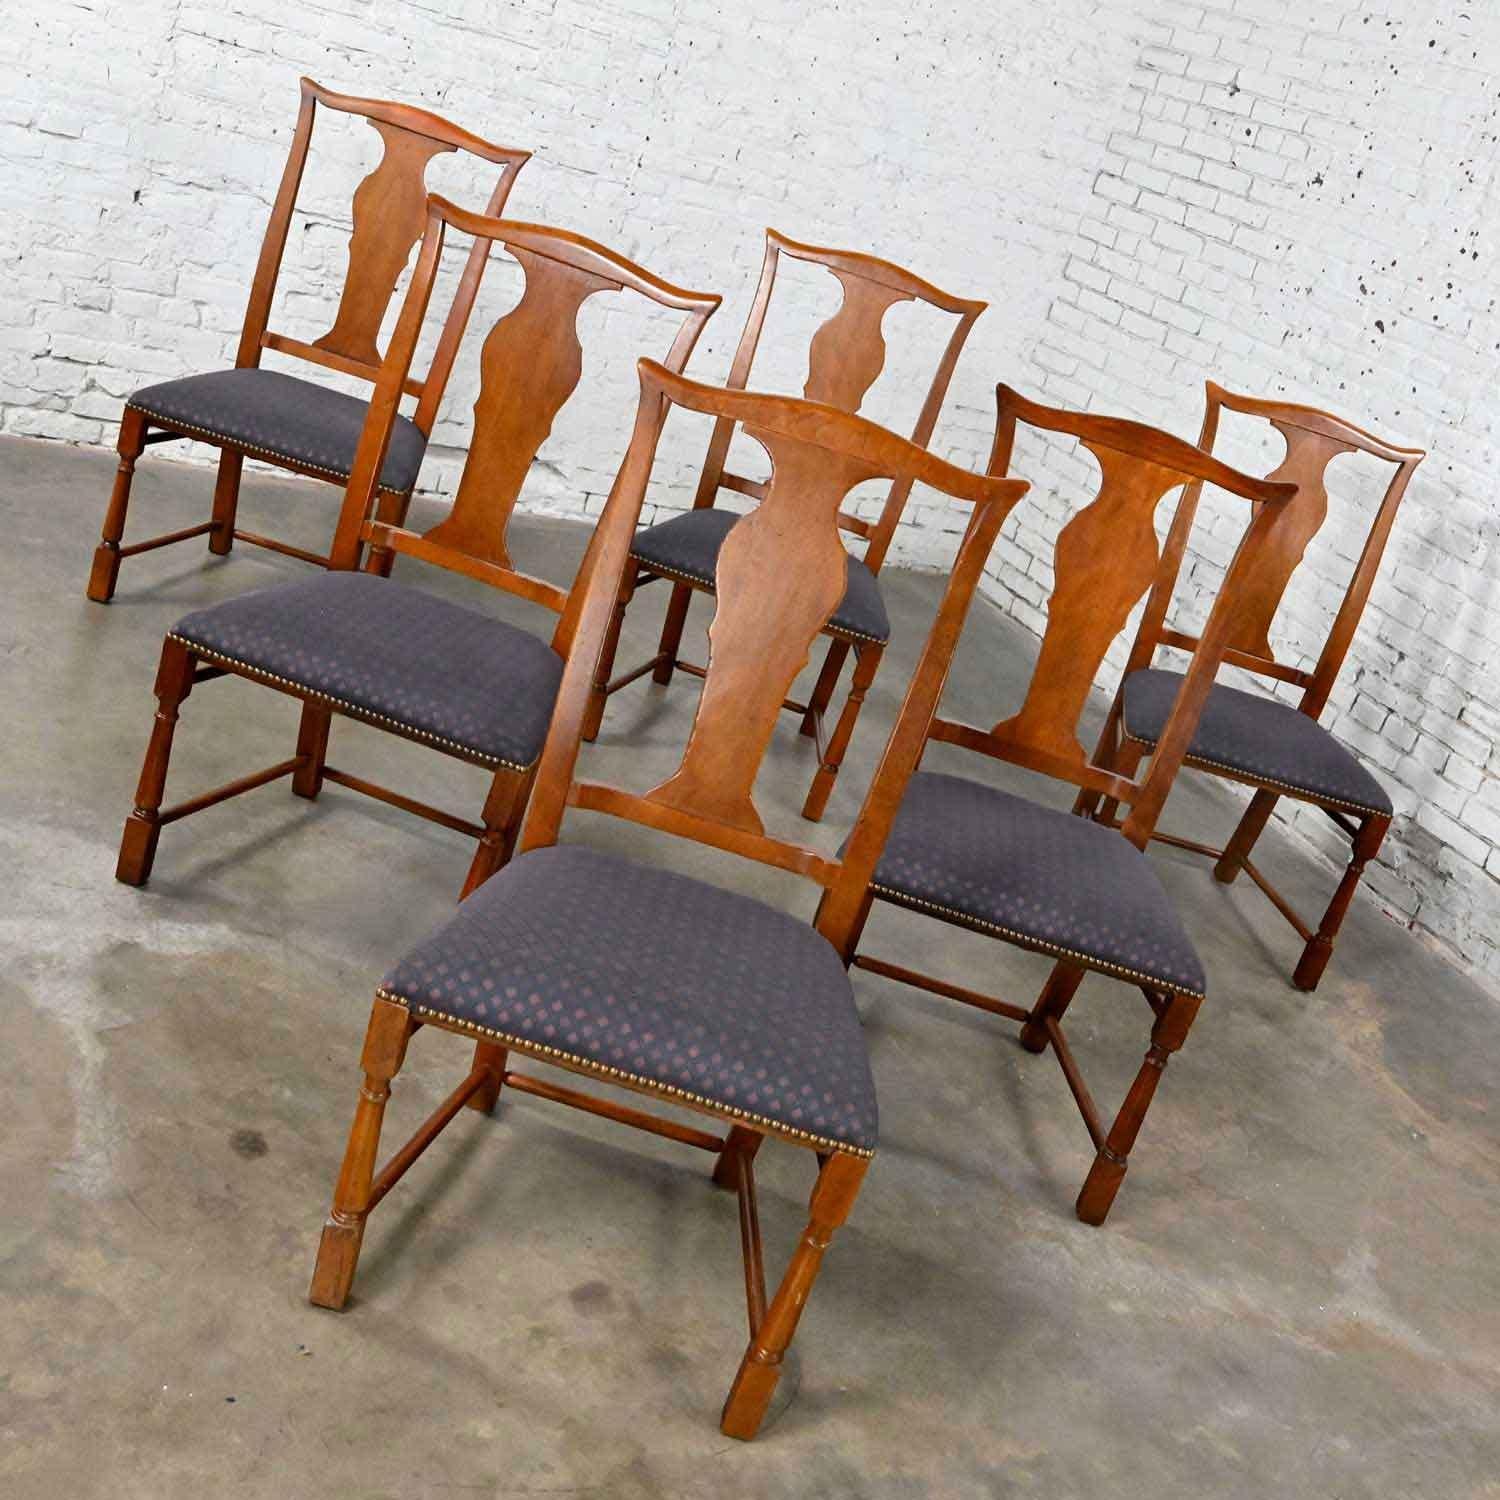 Handsome set of six Baker dining chairs in a Chippendale style with a solid back splat and turned front legs with stretchers, original finish, and upholstery with antiqued brass nail head trim. Beautiful condition, keeping in mind that these are